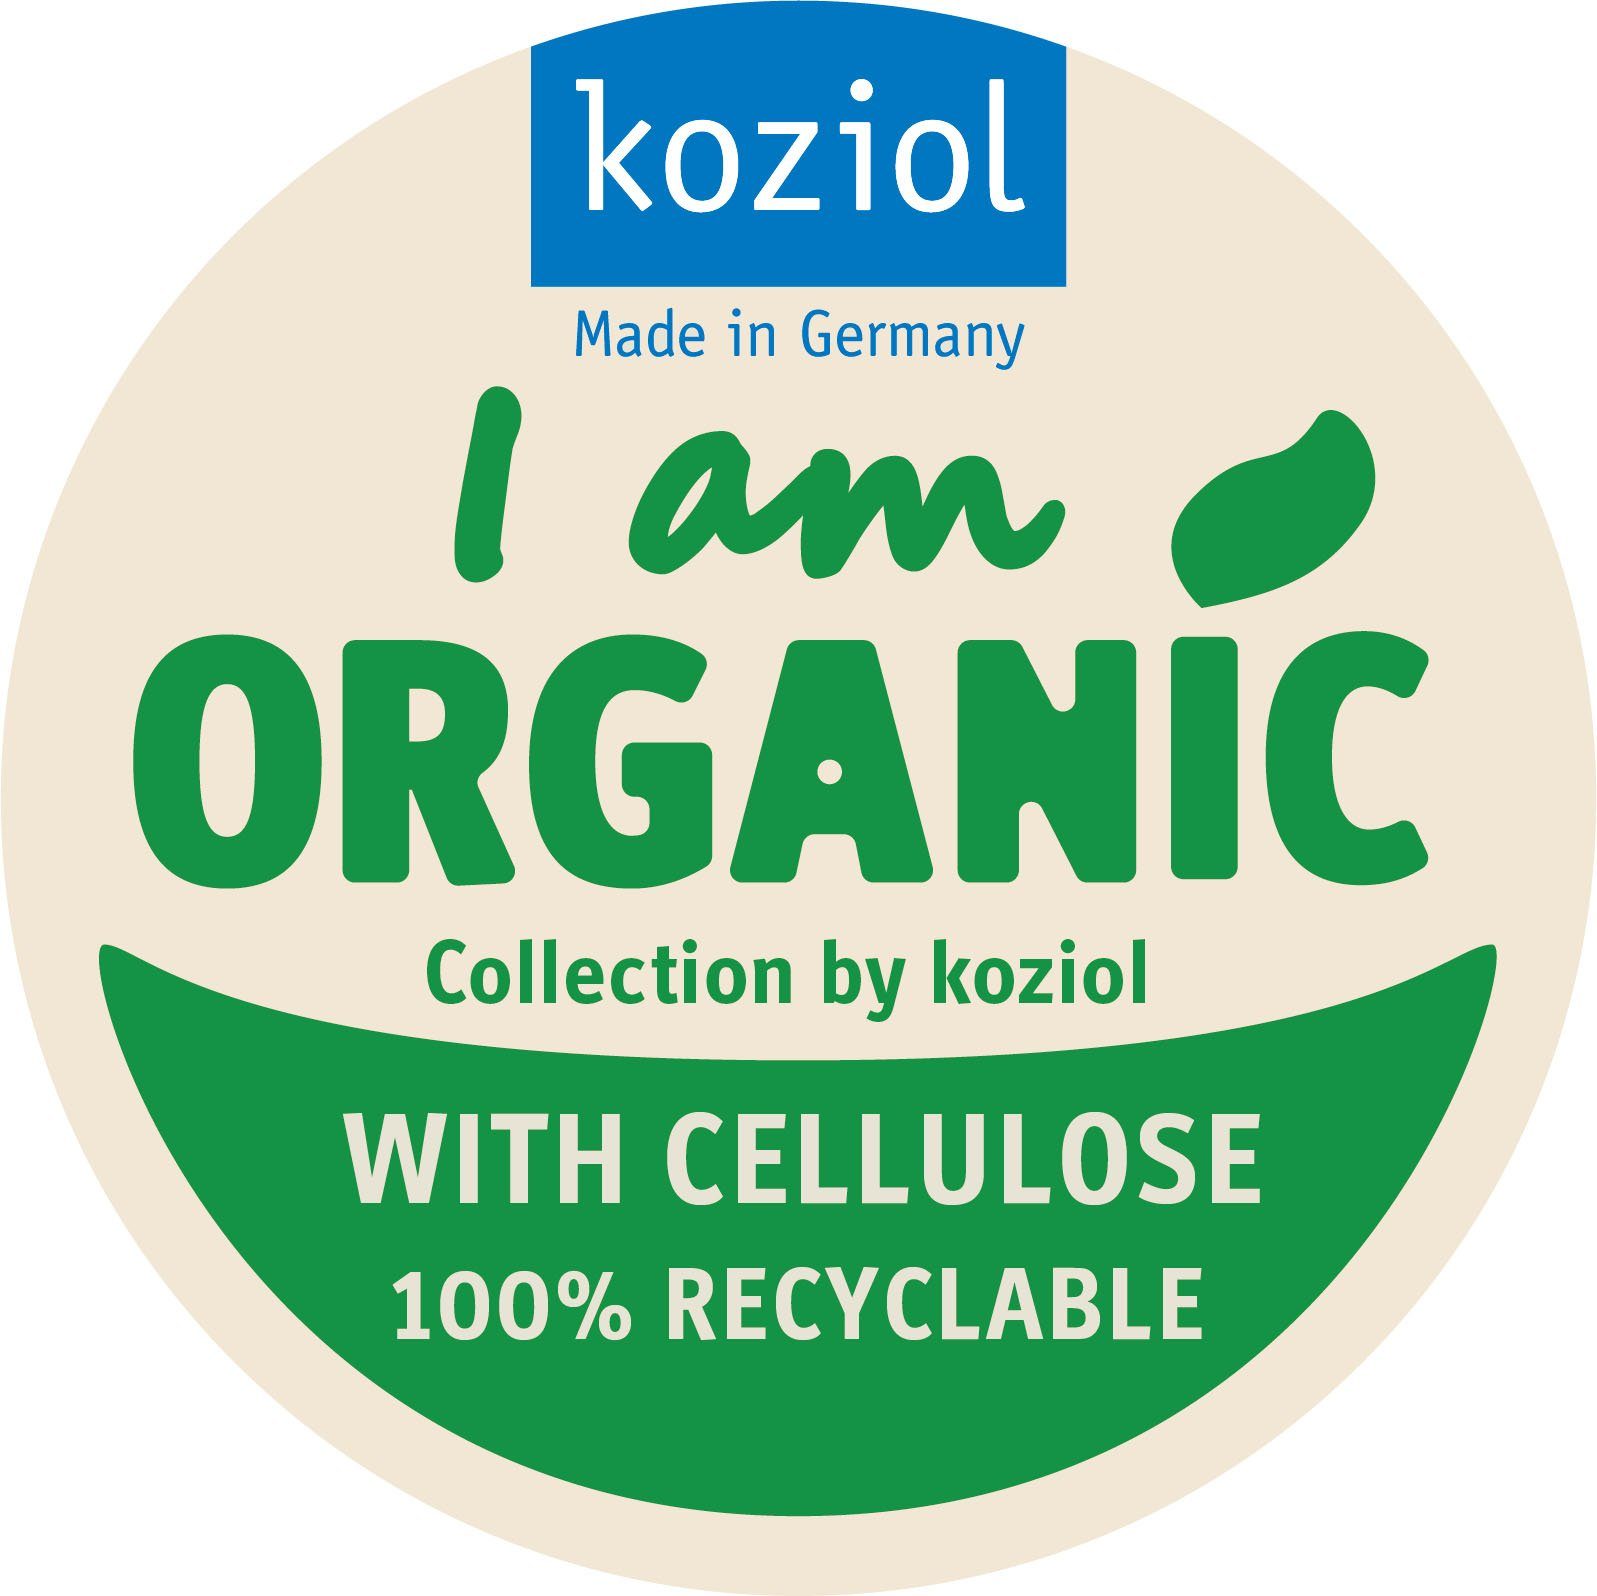 KOZIOL Coffee-to-go-Becher ISO TO GO Kunststoff, Material,doppelwandig,melaminfrei,recycelbar,400ml WACH, biobasiertes 100% Holz, HELL